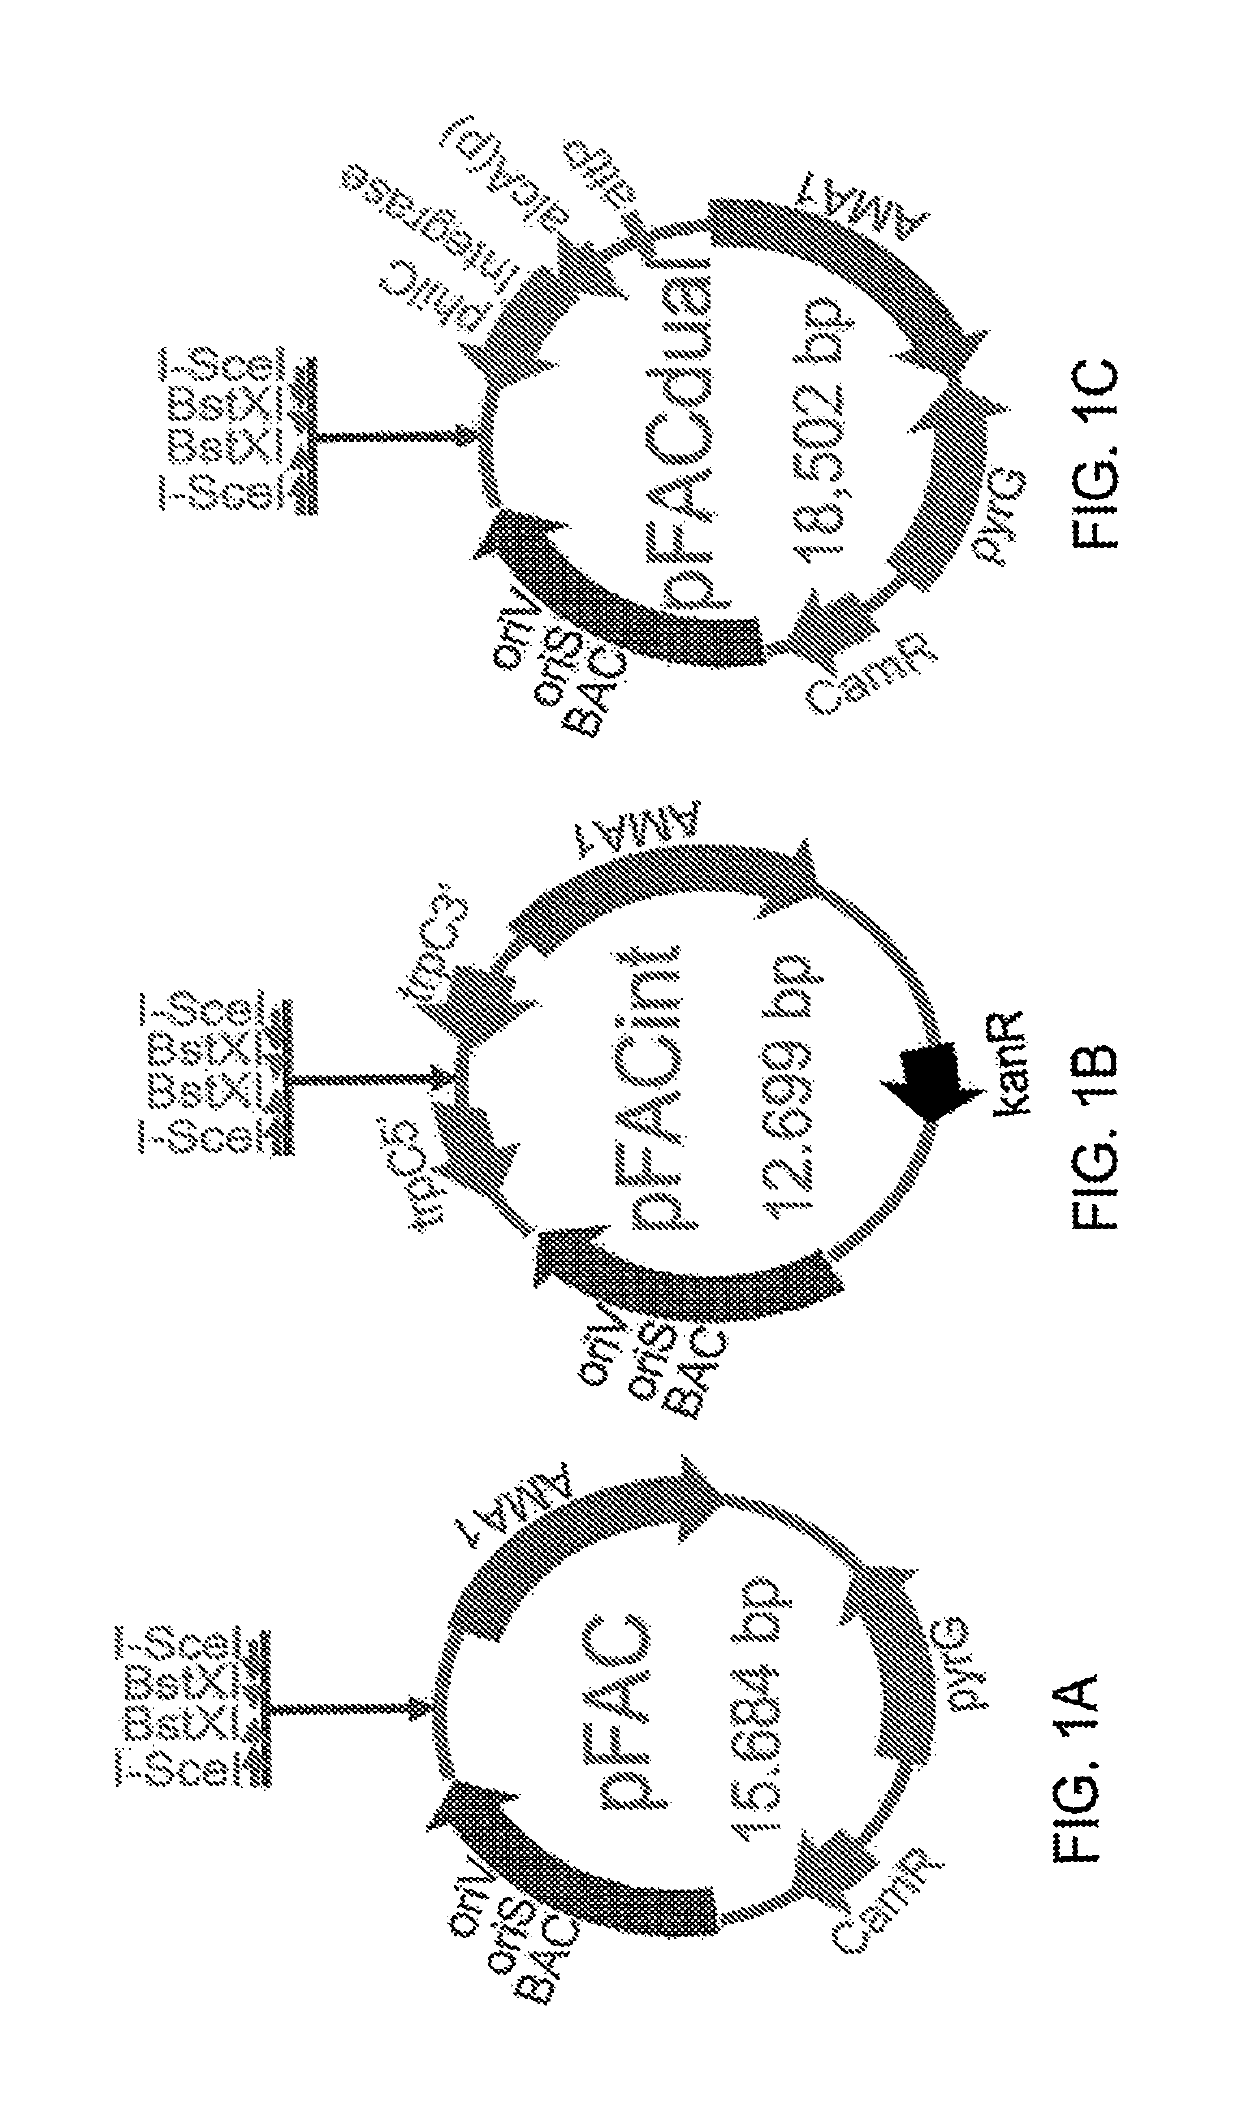 Fungal artificial chromosomes, compositions, methods and uses therefor